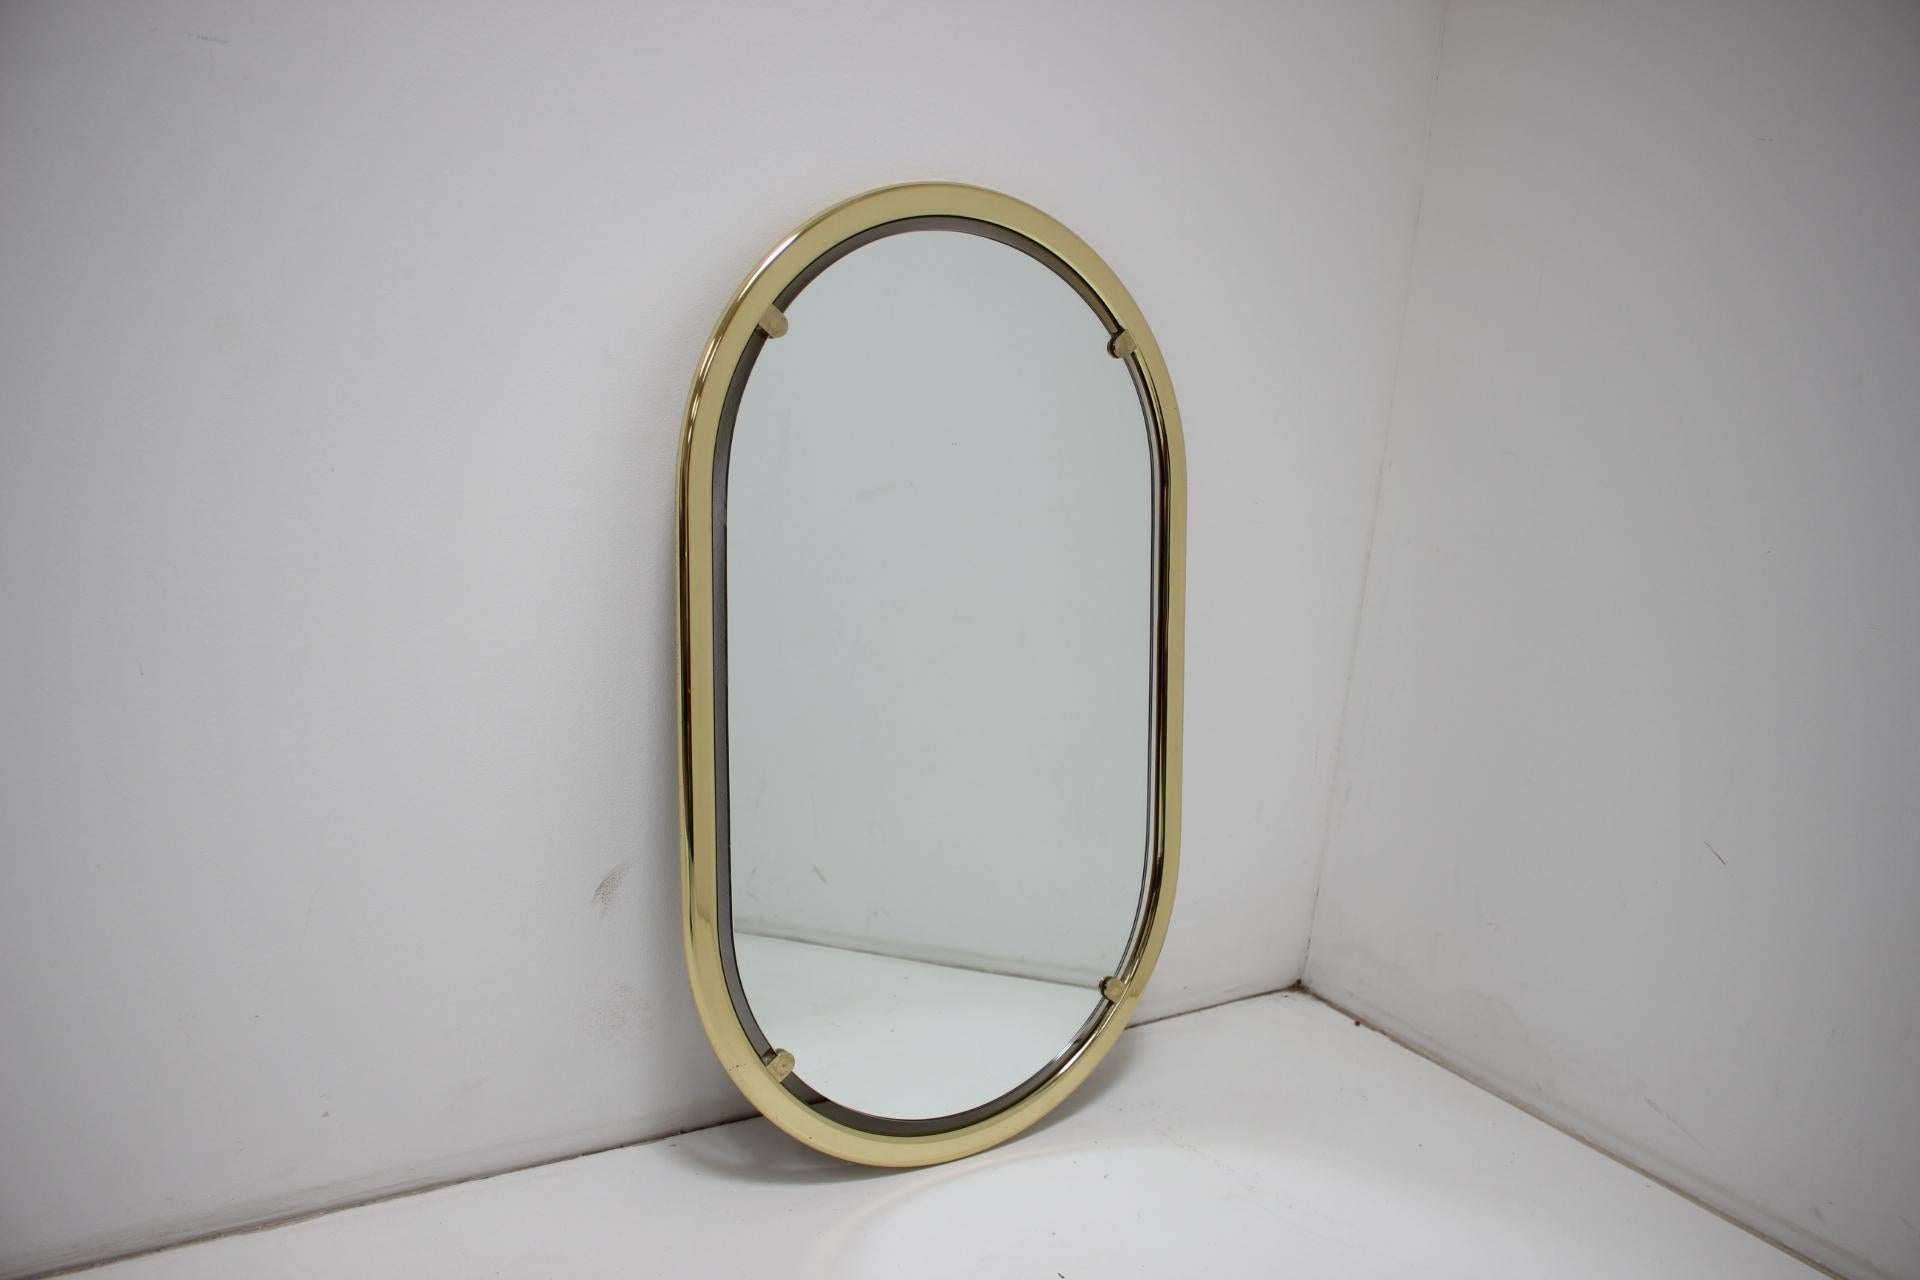 
Made in Germany
Made of Mirror,Brass
With Aged Patina
Re-polished
Good Original Condition